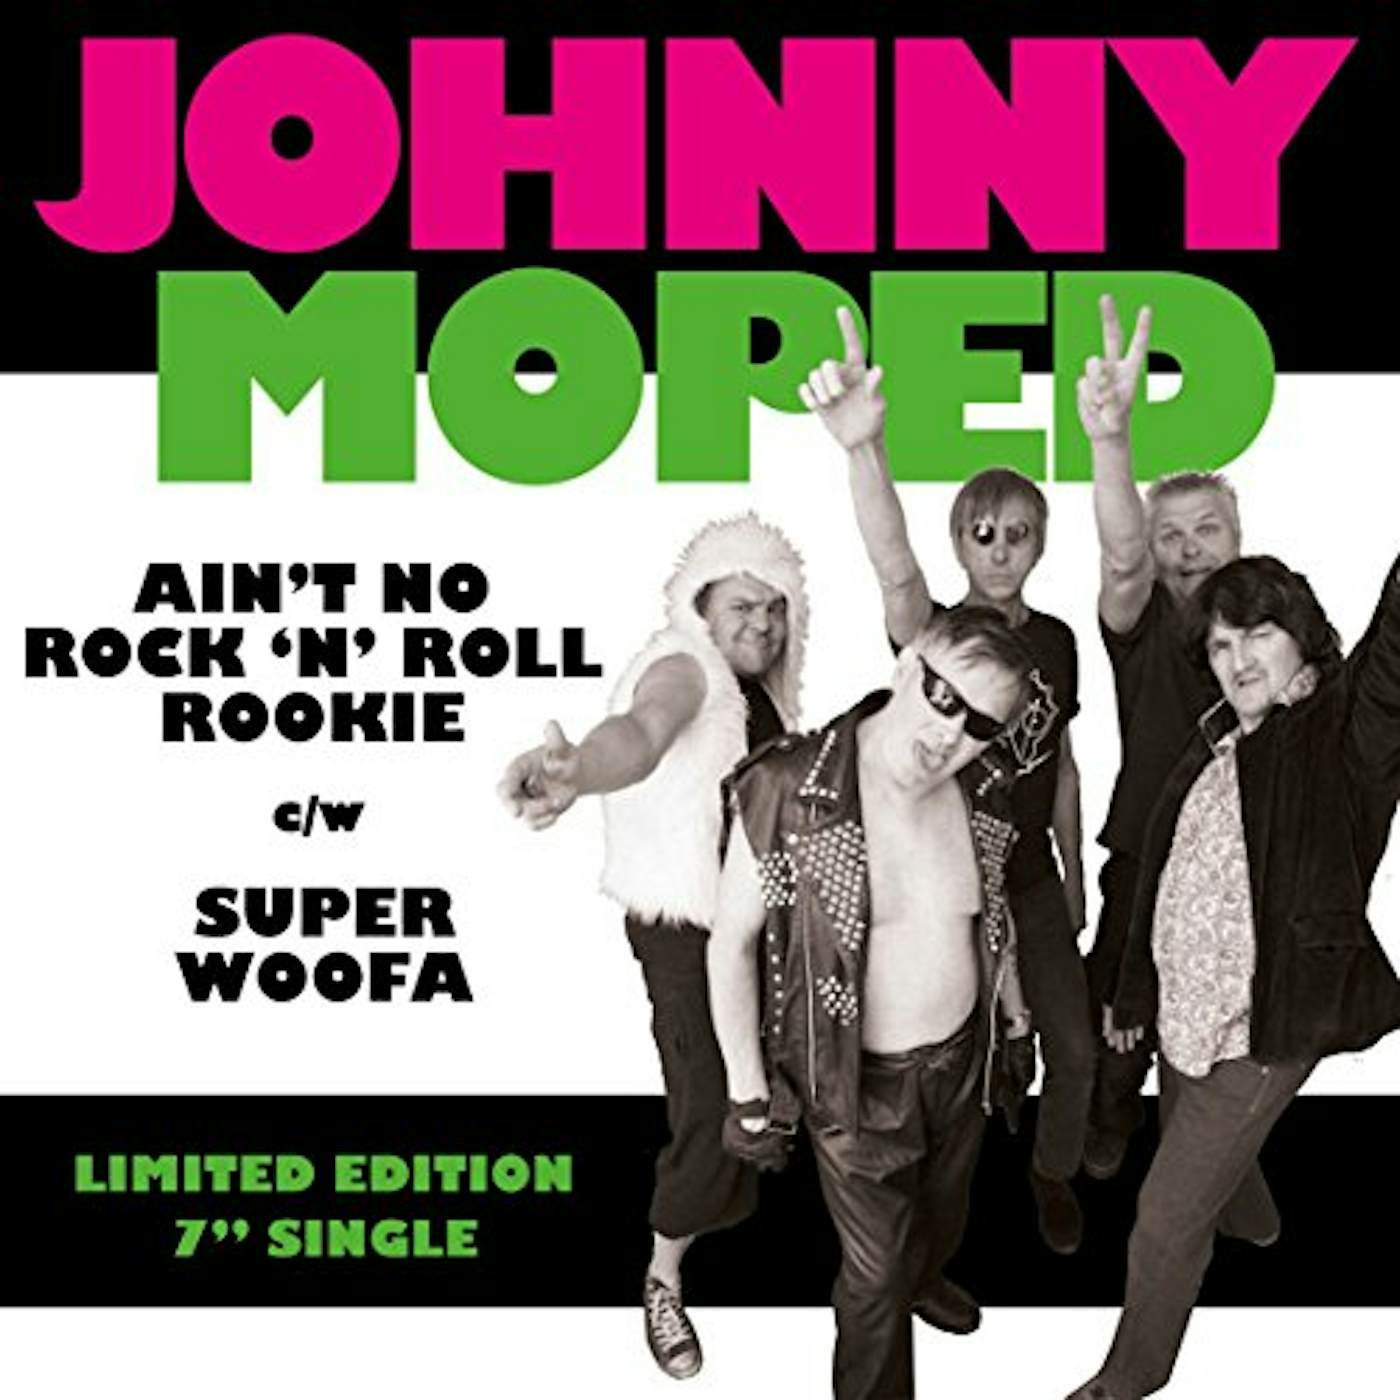 Johnny Moped AIN'T NO ROCK 'N' ROLL ROOKIE Vinyl Record